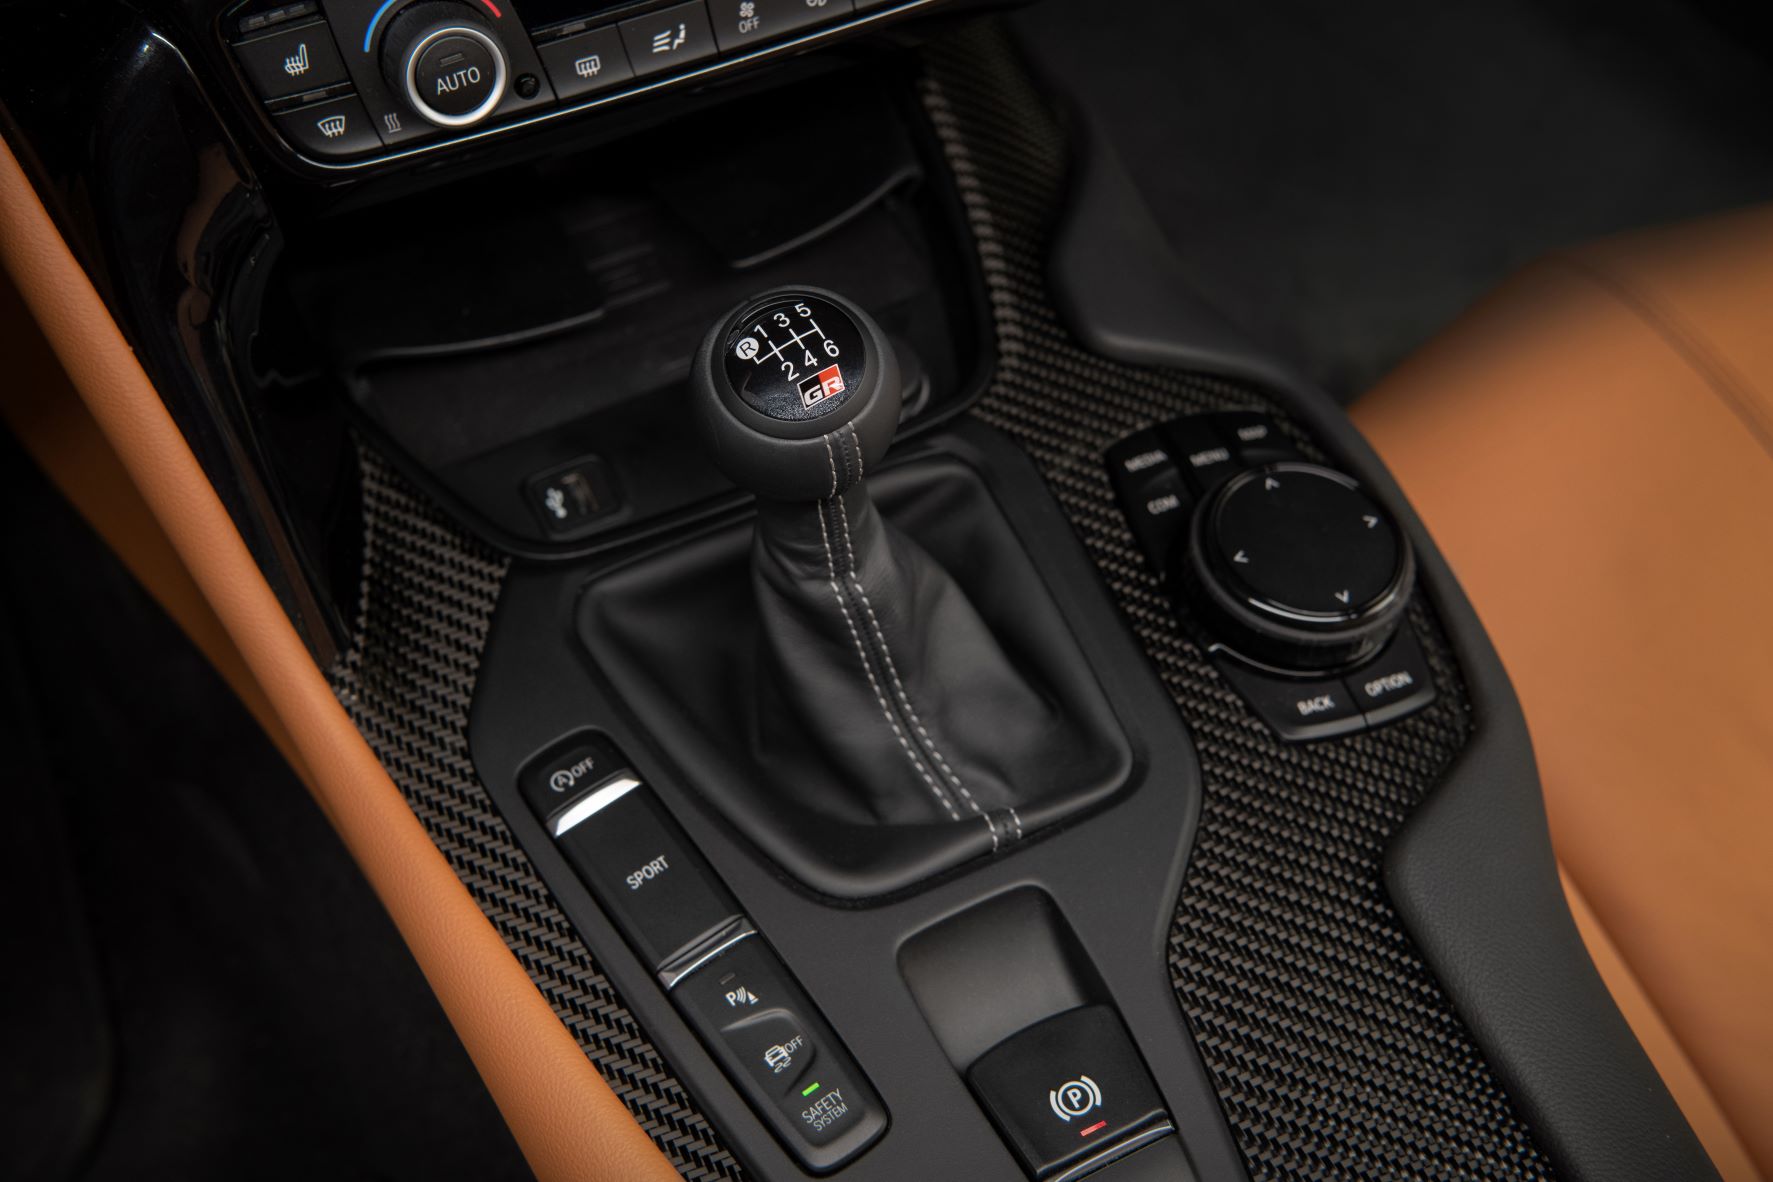 Centre console of the manual transmission on the new GR Supra